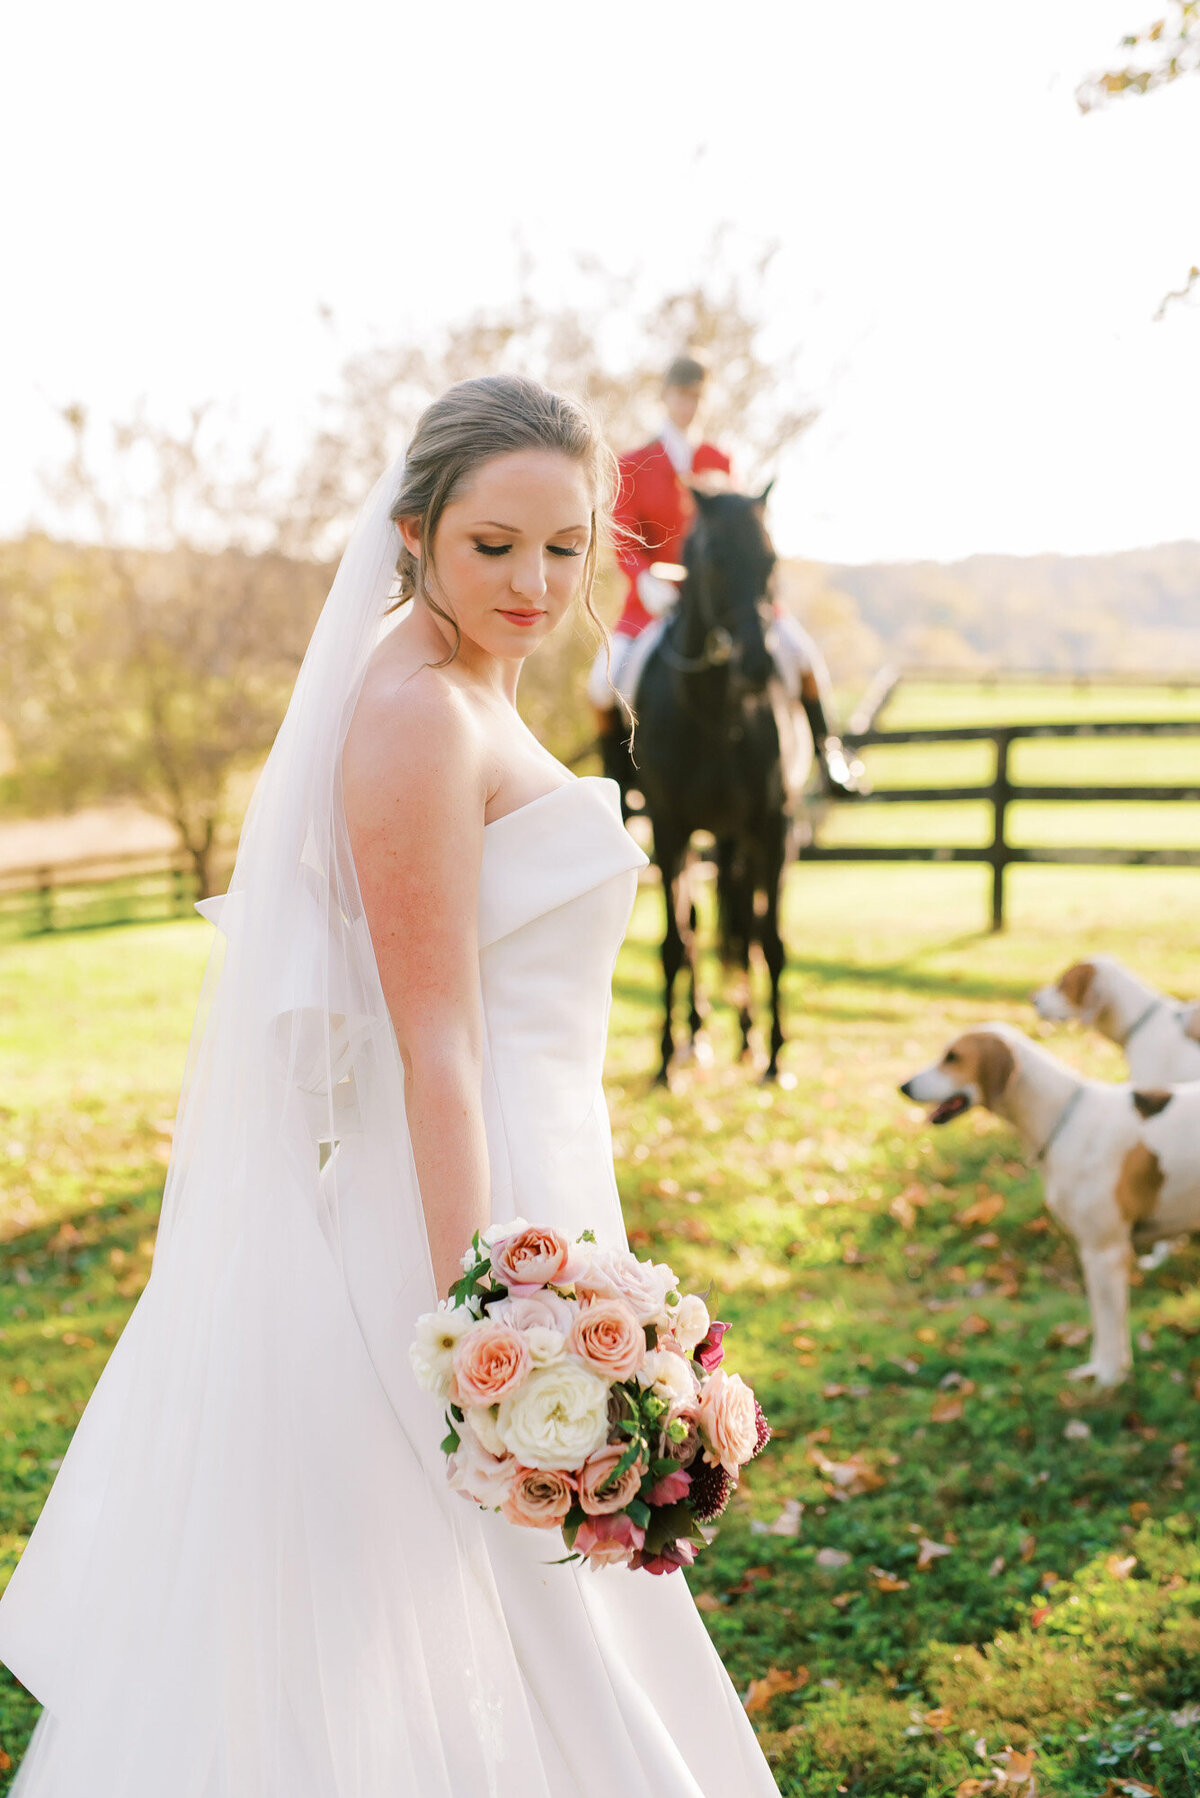 Bride wearing her gown holding a bouquet while groom riding a horse and two dogs looking